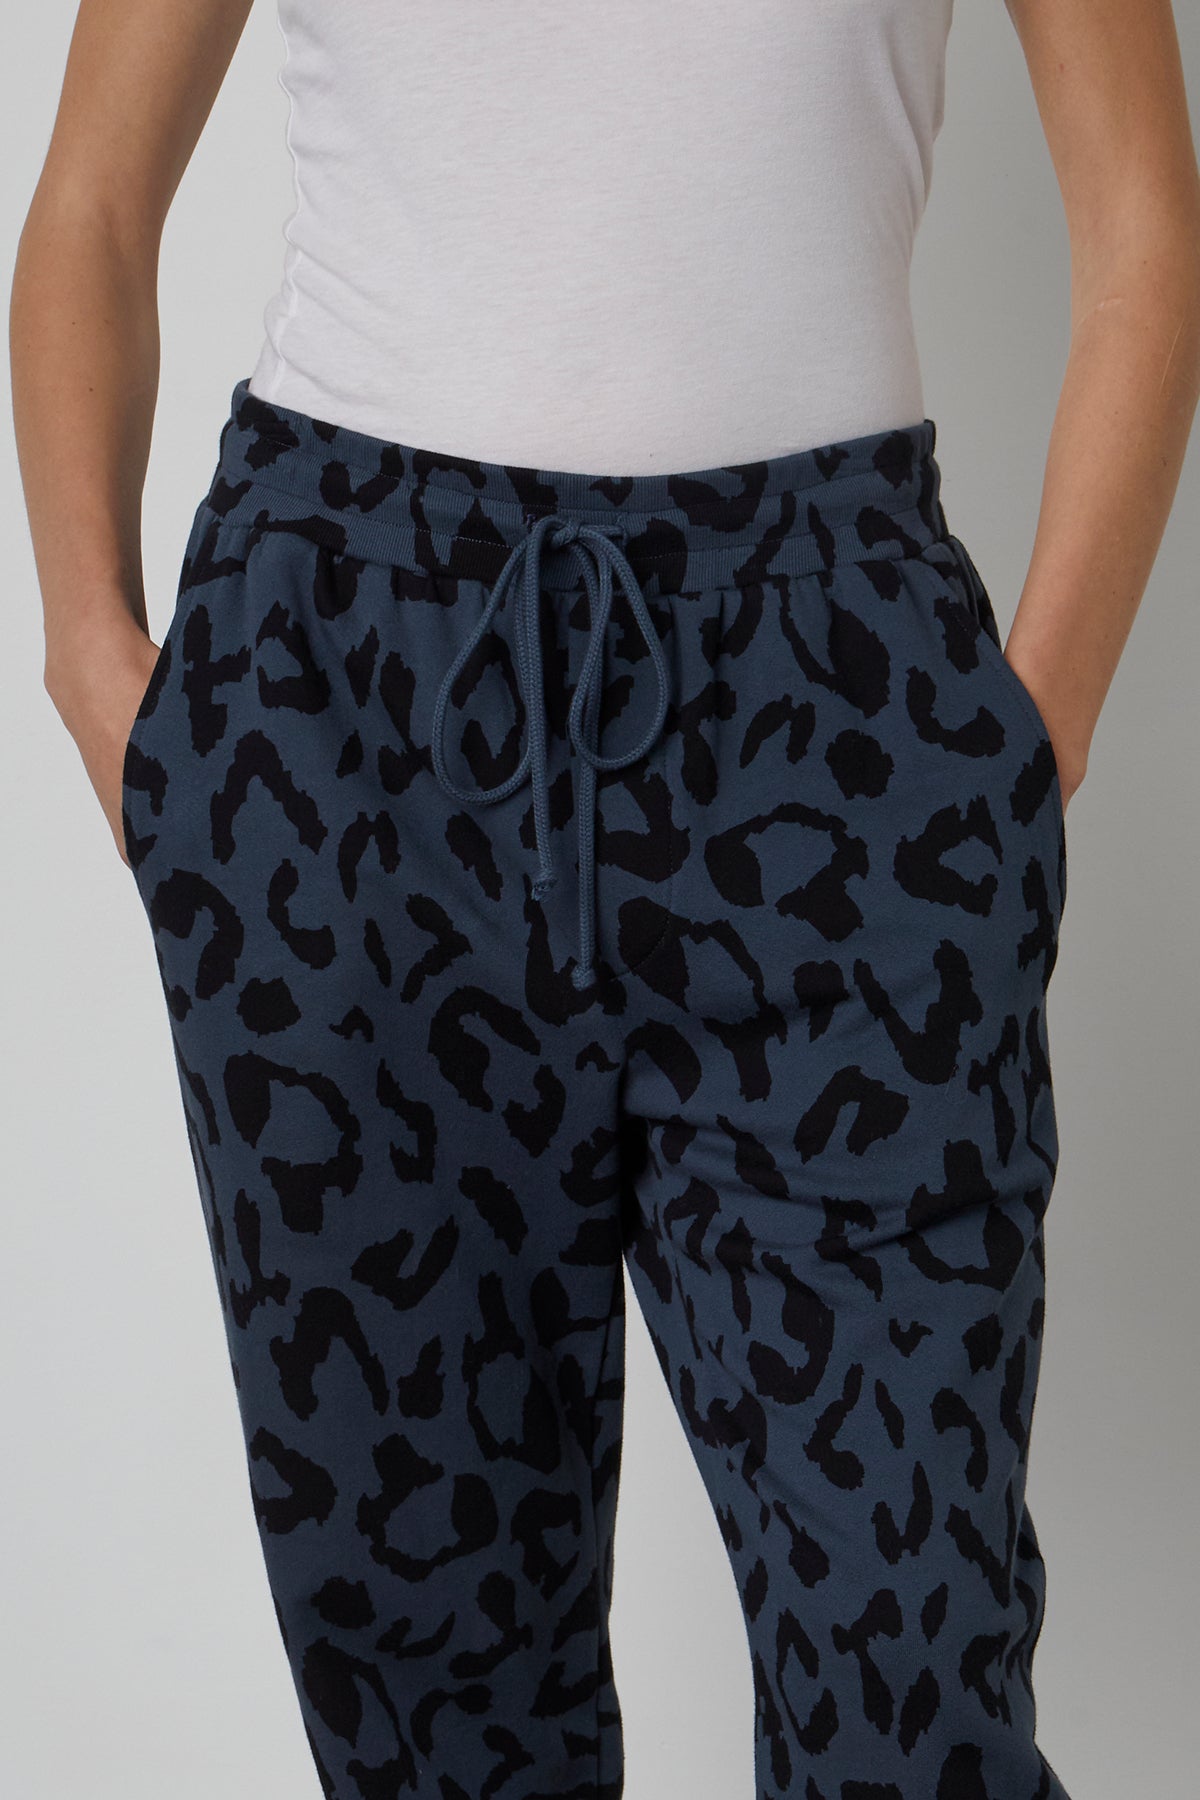 A woman donning the Velvet by Graham & Spencer GWEN PRINTED JOGGER, embodying a low-key jogger style in the form of black and blue leopard print jogging pants.-23119953592513